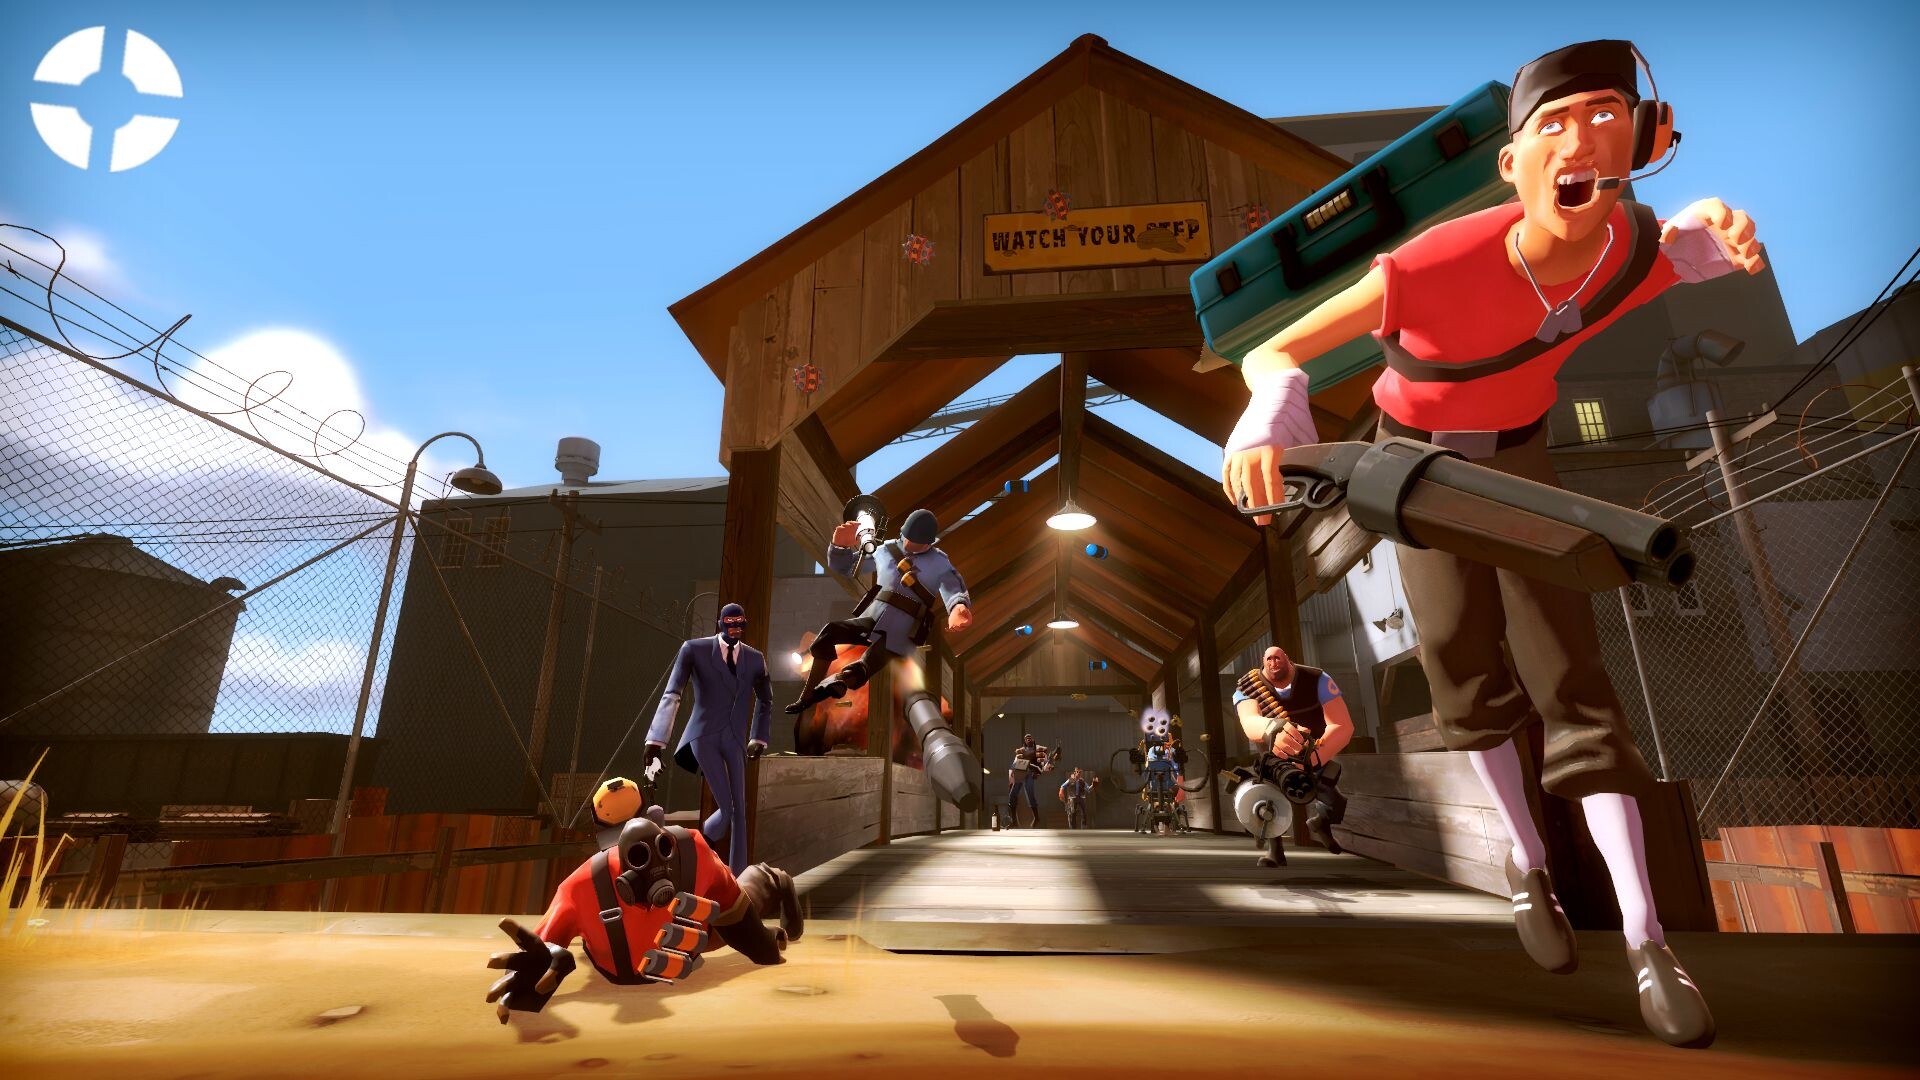 Garry's Mod: Team Fortress 2 characters, A first-person shooter online video game created by Valve. 1920x1080 Full HD Wallpaper.